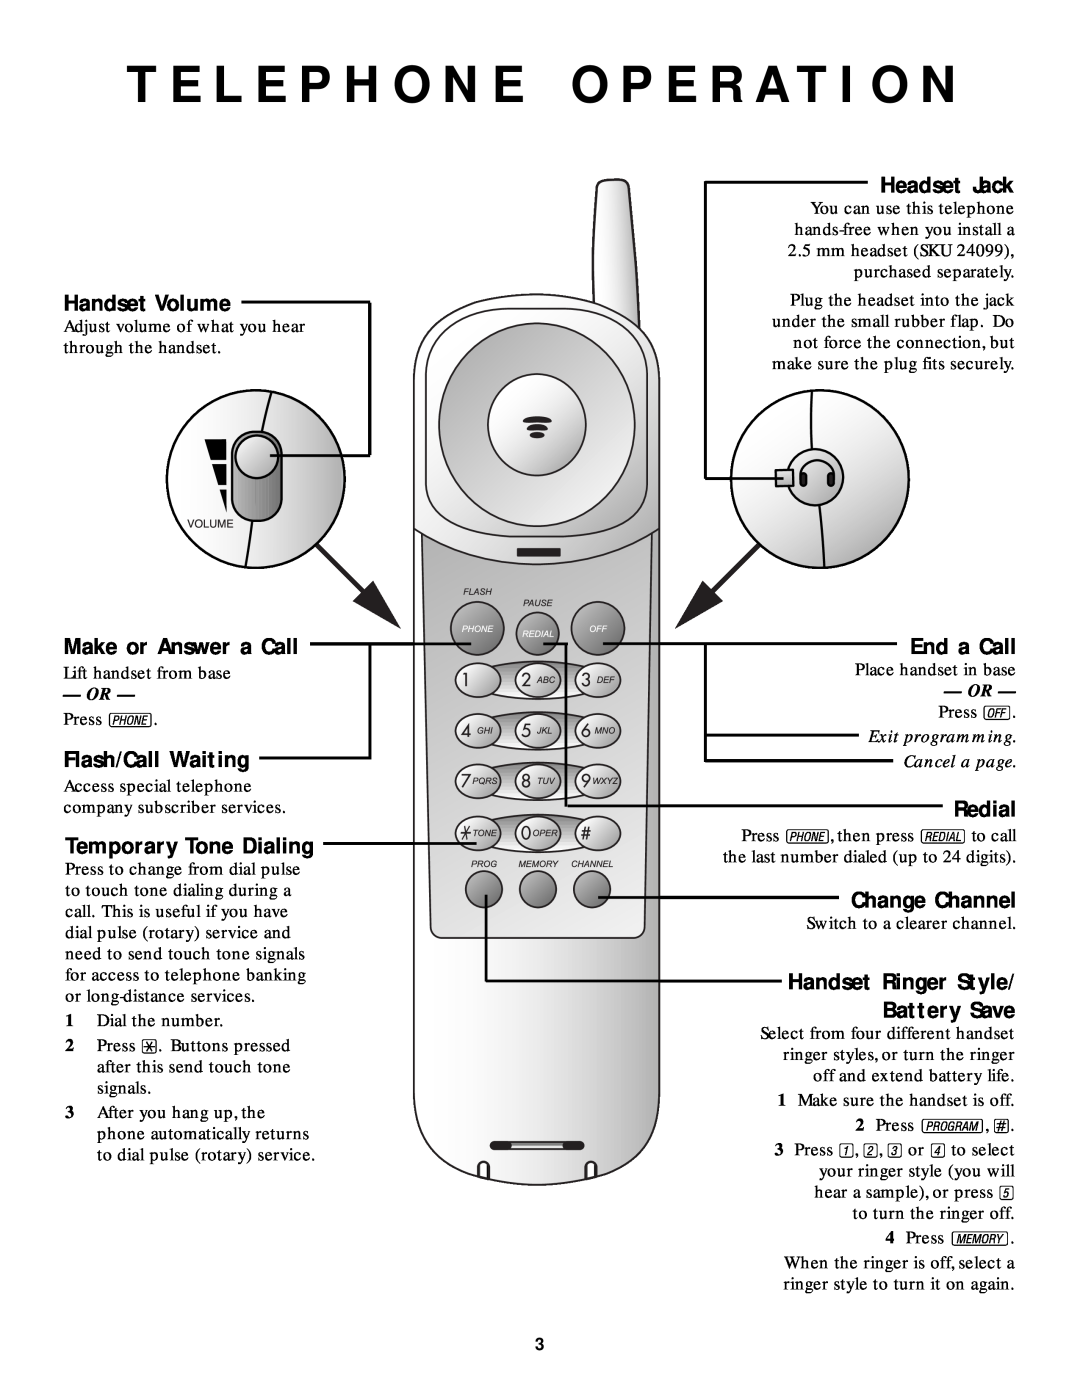 AT&T 9210 T E L E P H O N E O P E R A T I O N, Headset Jack, Handset Volume, Battery Save, Make or Answer a Call, Redial 